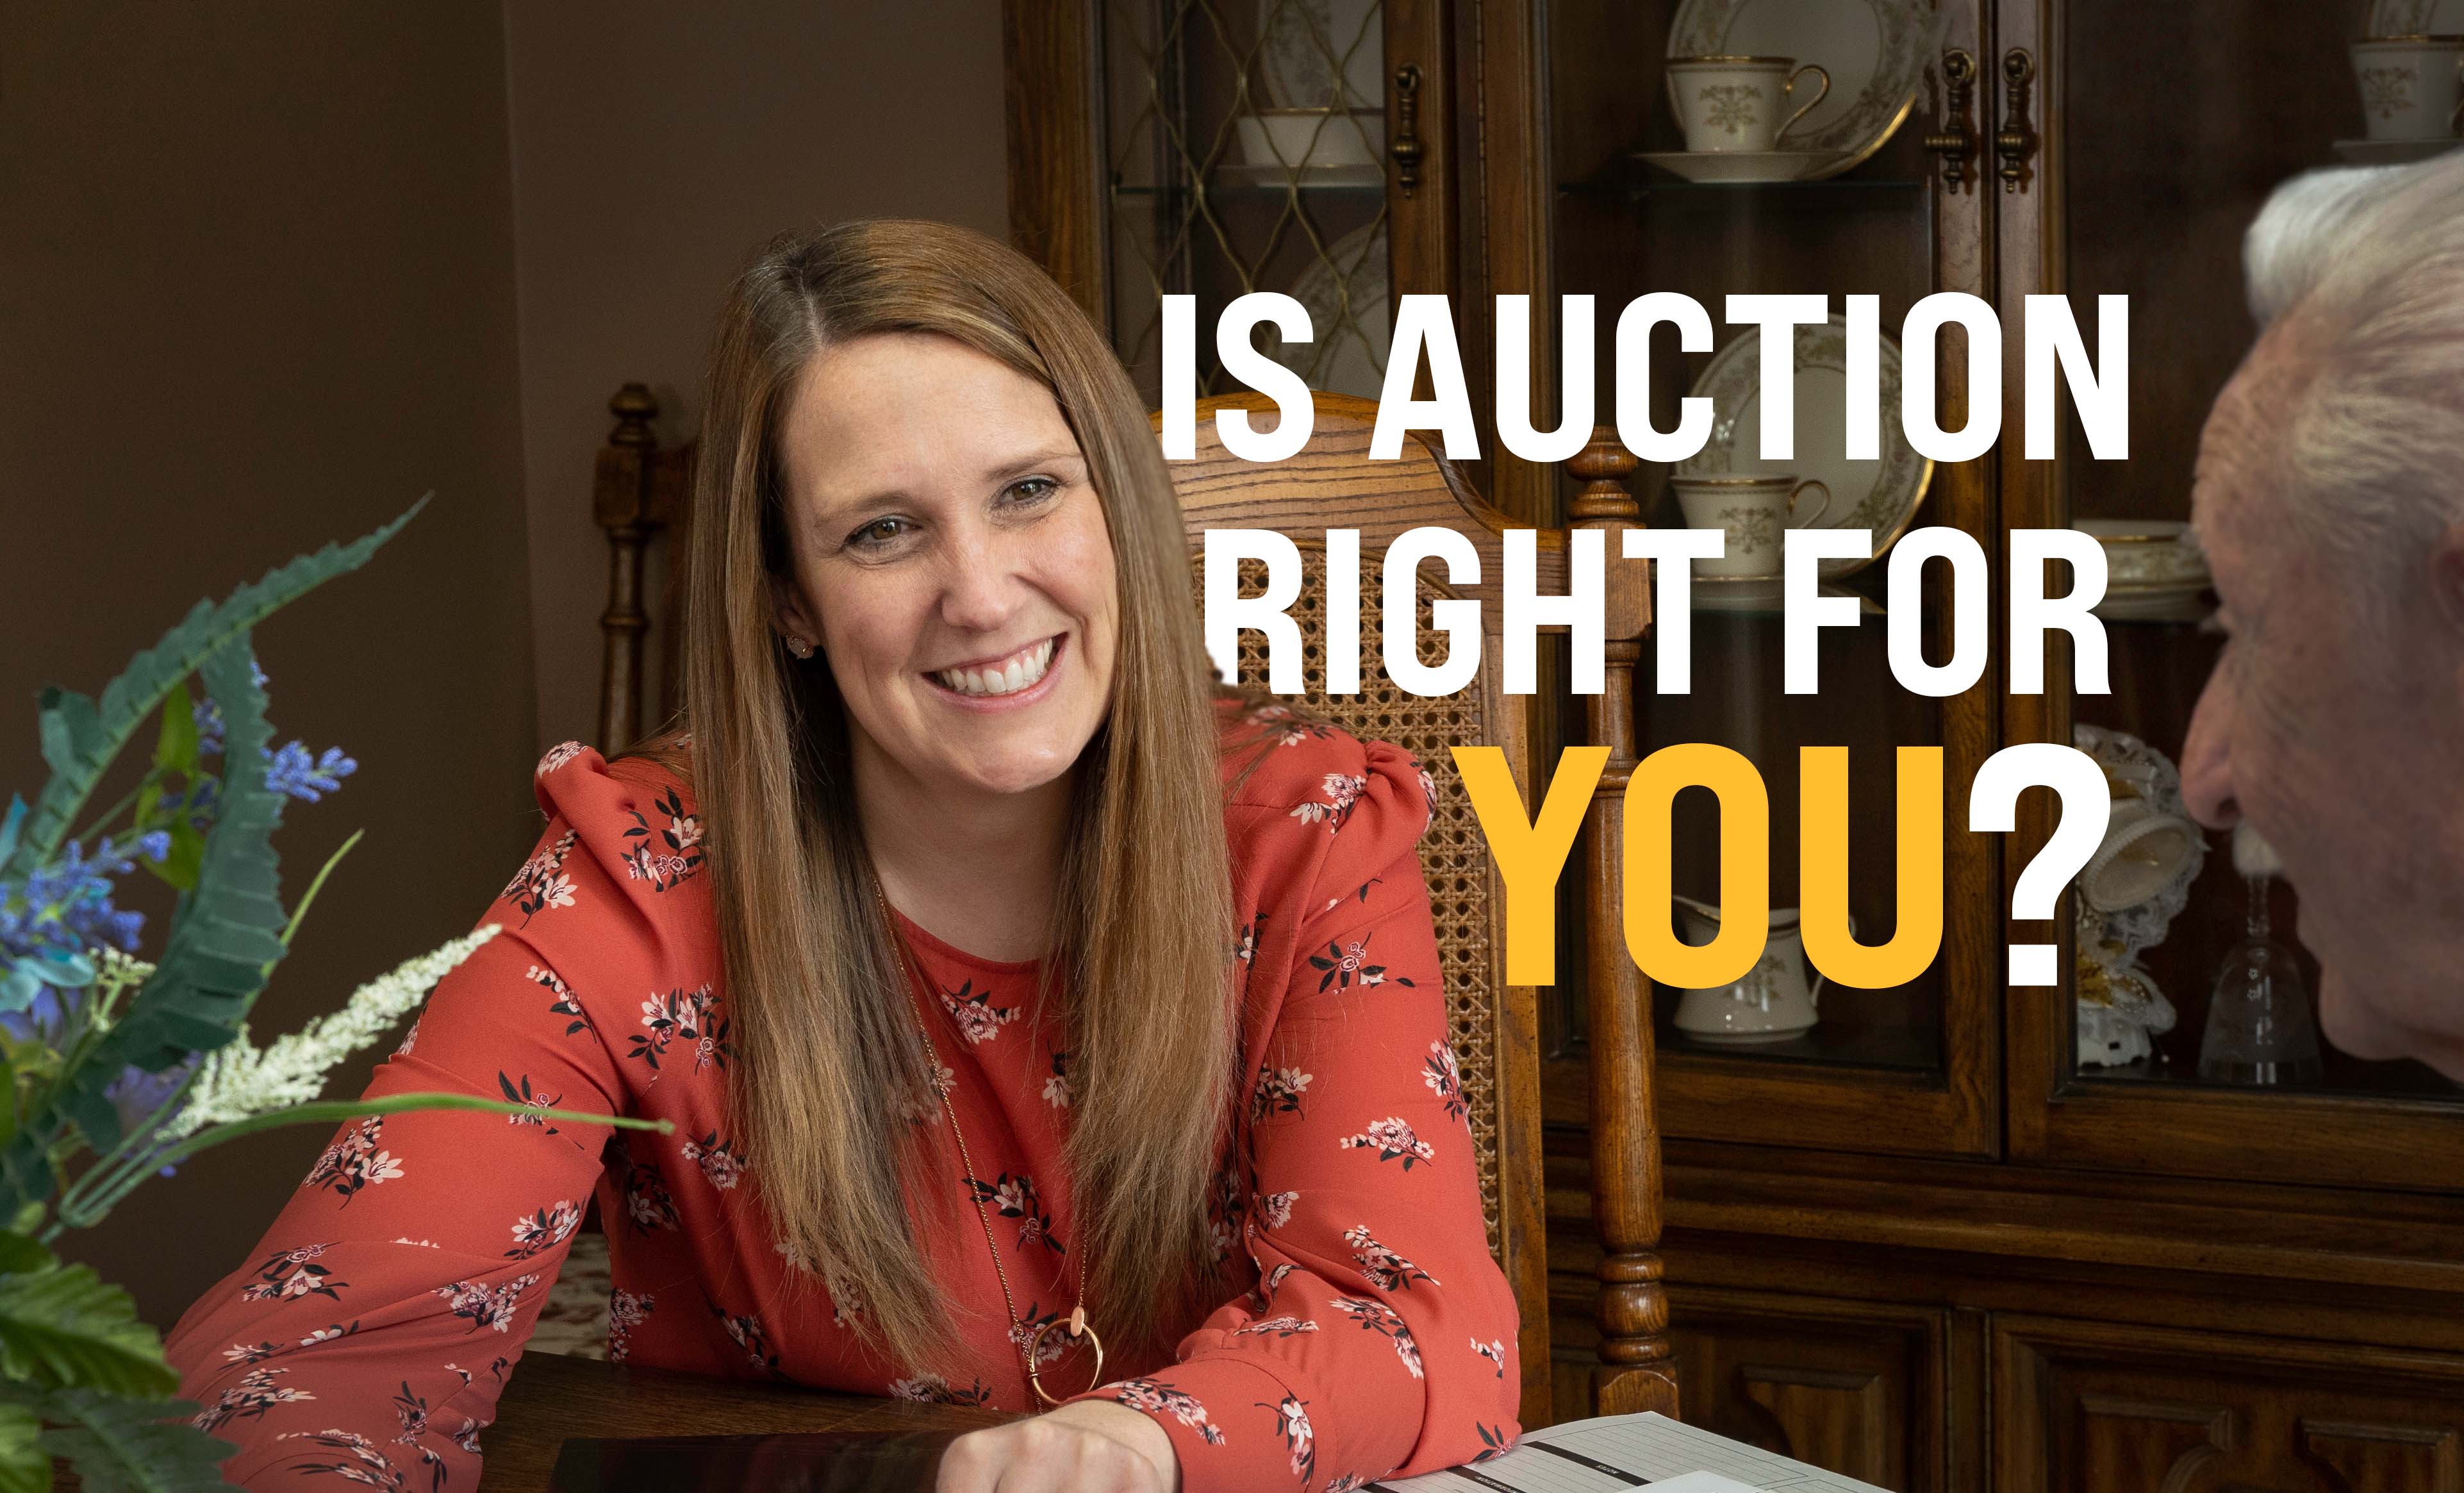 Is Auction Right for You? Answer These 7 Questions to Find Out